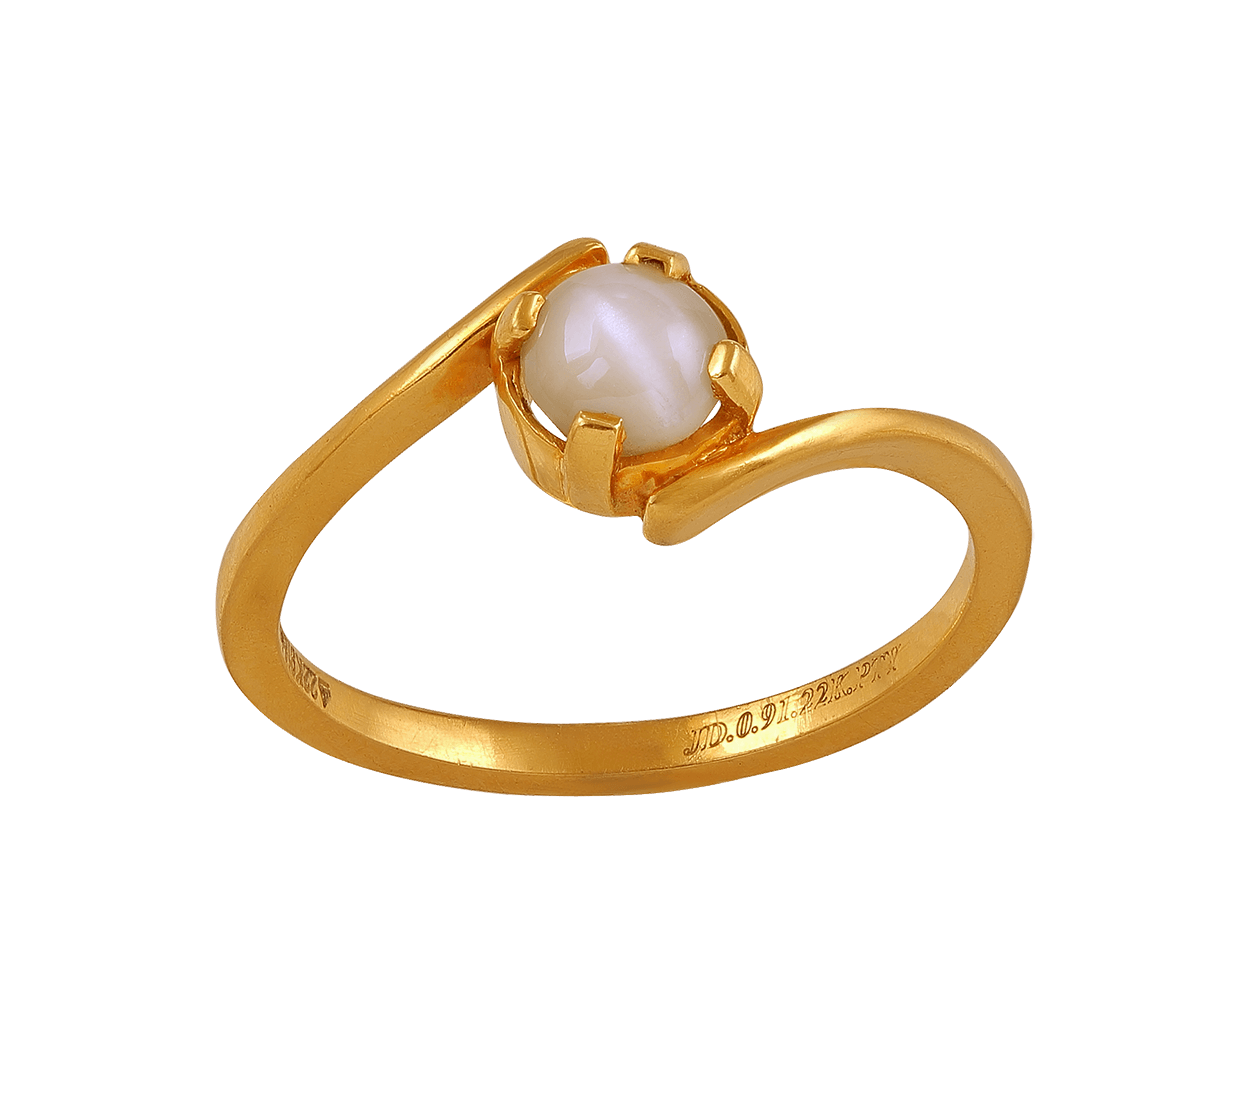 Buy Retrend Design® South Sea Pearl Ring Original Certified पर्ल रिंग फॉर  वीमेन Natural & Original Premium Sacche Moti Chandi Ring Round Shape Asli Moti  Anguthi With Certificate Of Authenticity at Amazon.in